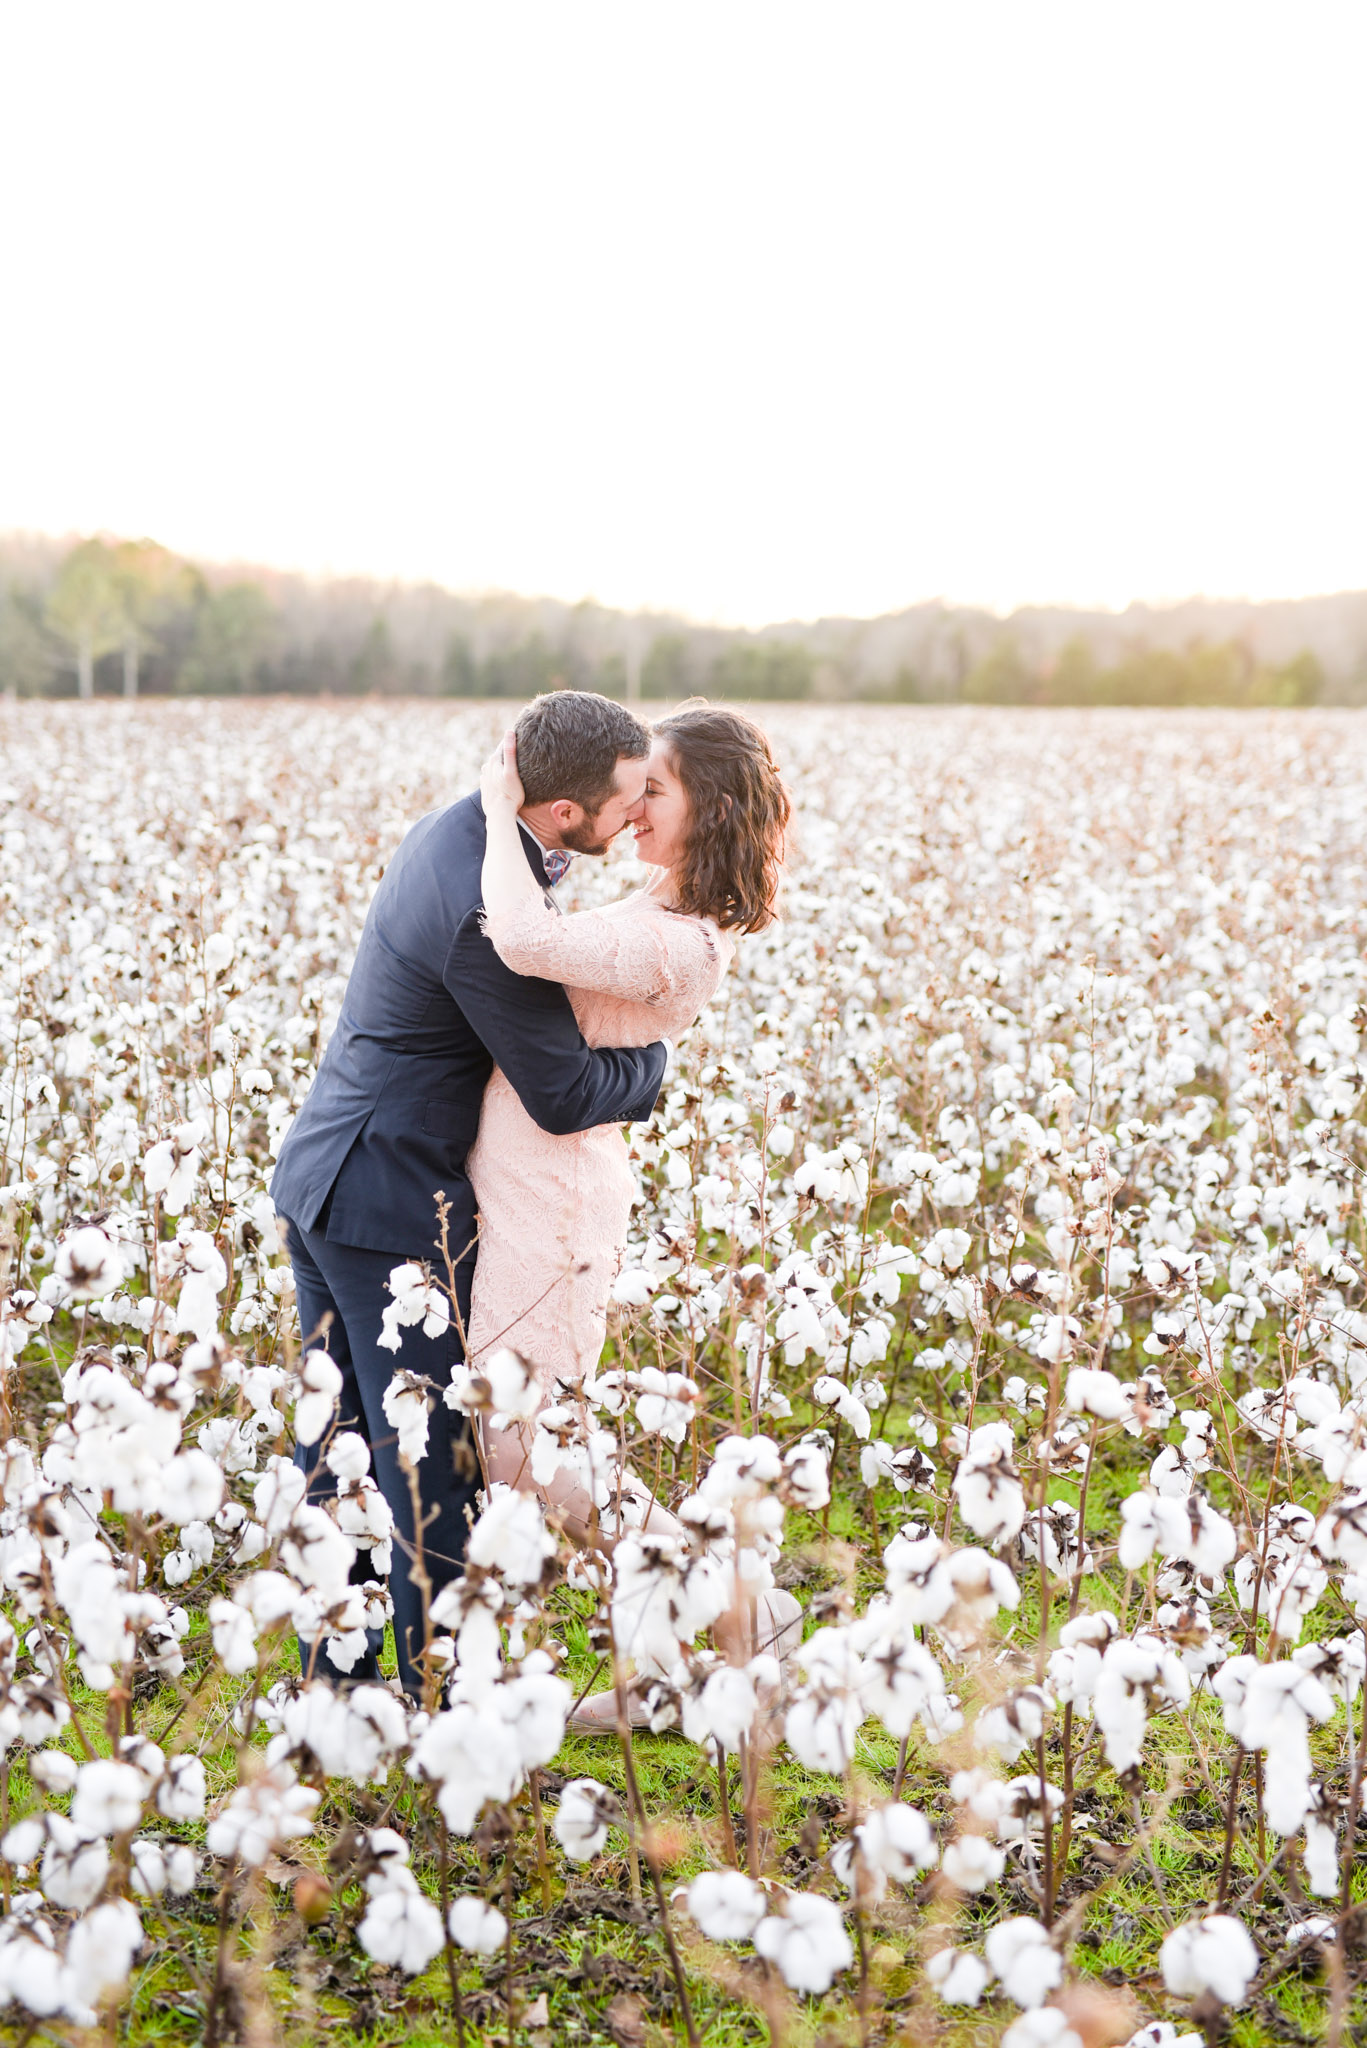 Couple almost kisses while standing in cotton field.